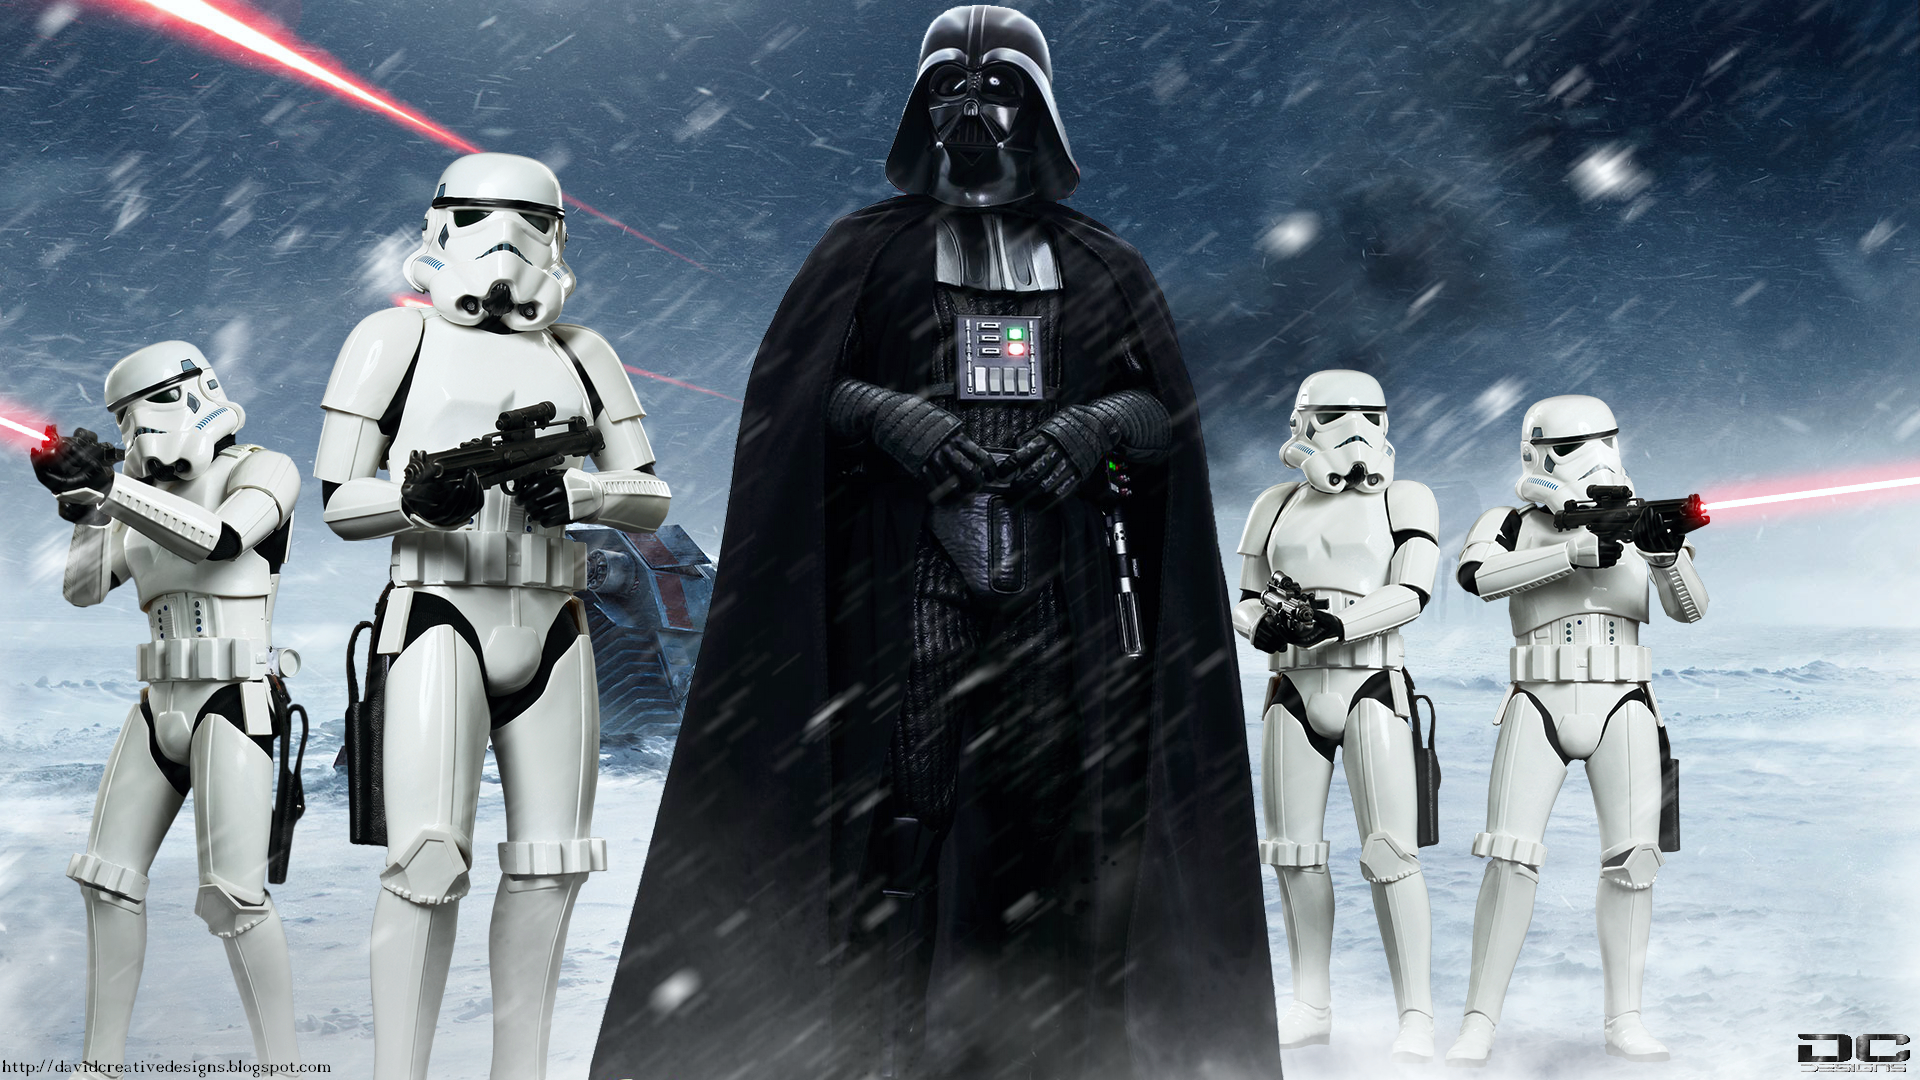 569454.png (1920×1080). Star wars wallpaper, Star wars poster, Star wars awesome